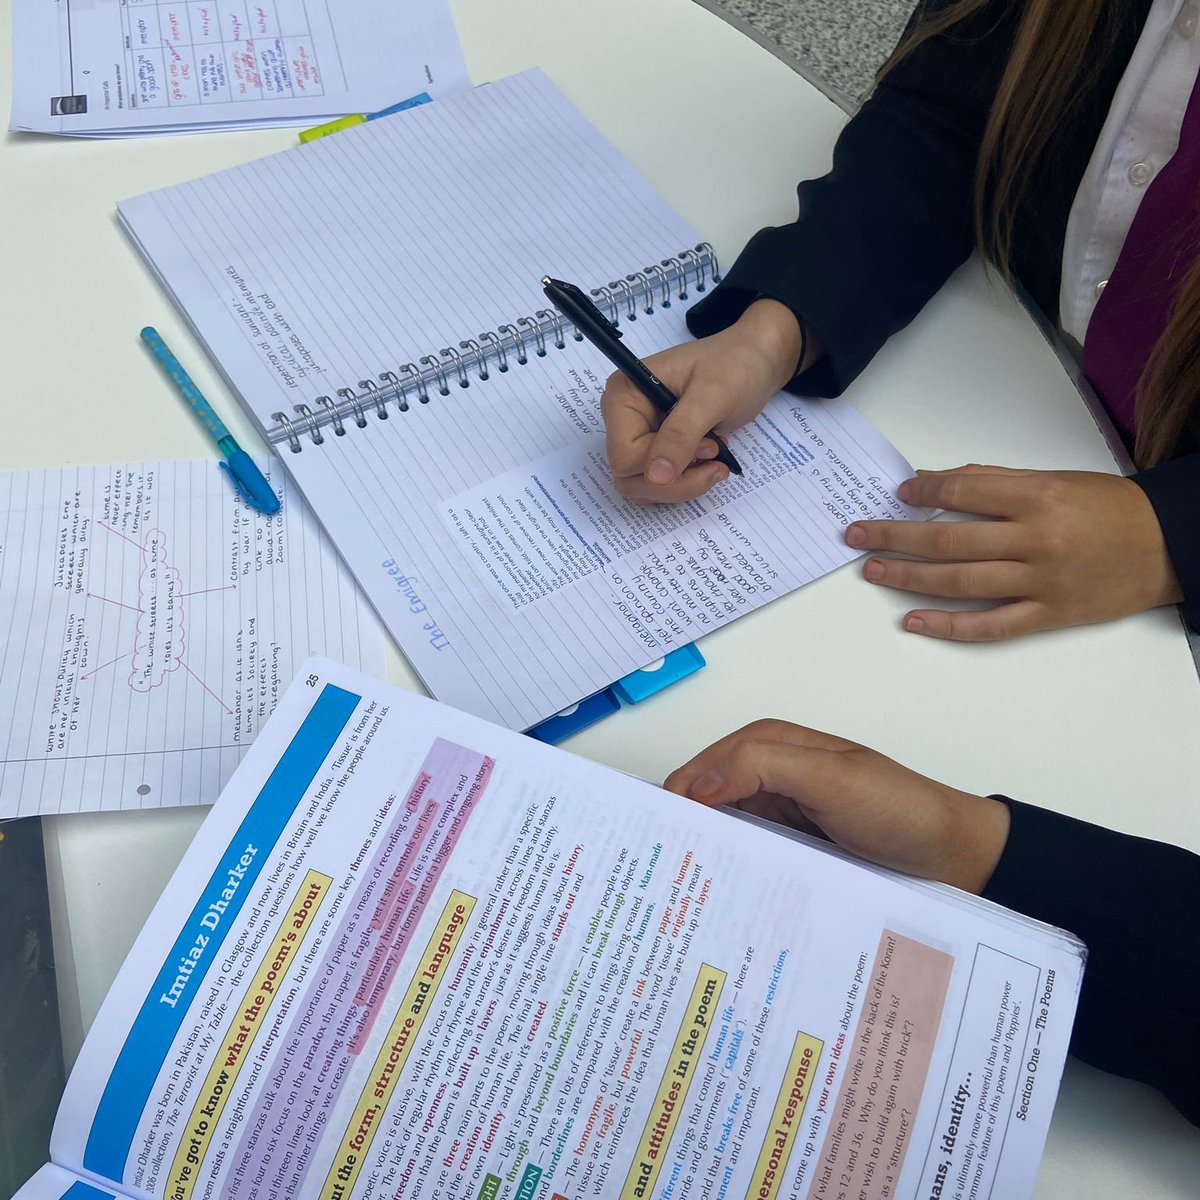 🤩 It was incredible to see our year 11s with all of their revision material this mrning, preparing for their English literature paper 2 exam whilst having breakfast. Such a #proud moment! 🤩

#outcomesfocused #GCSEexams #Englishliterature #wearefreebrough